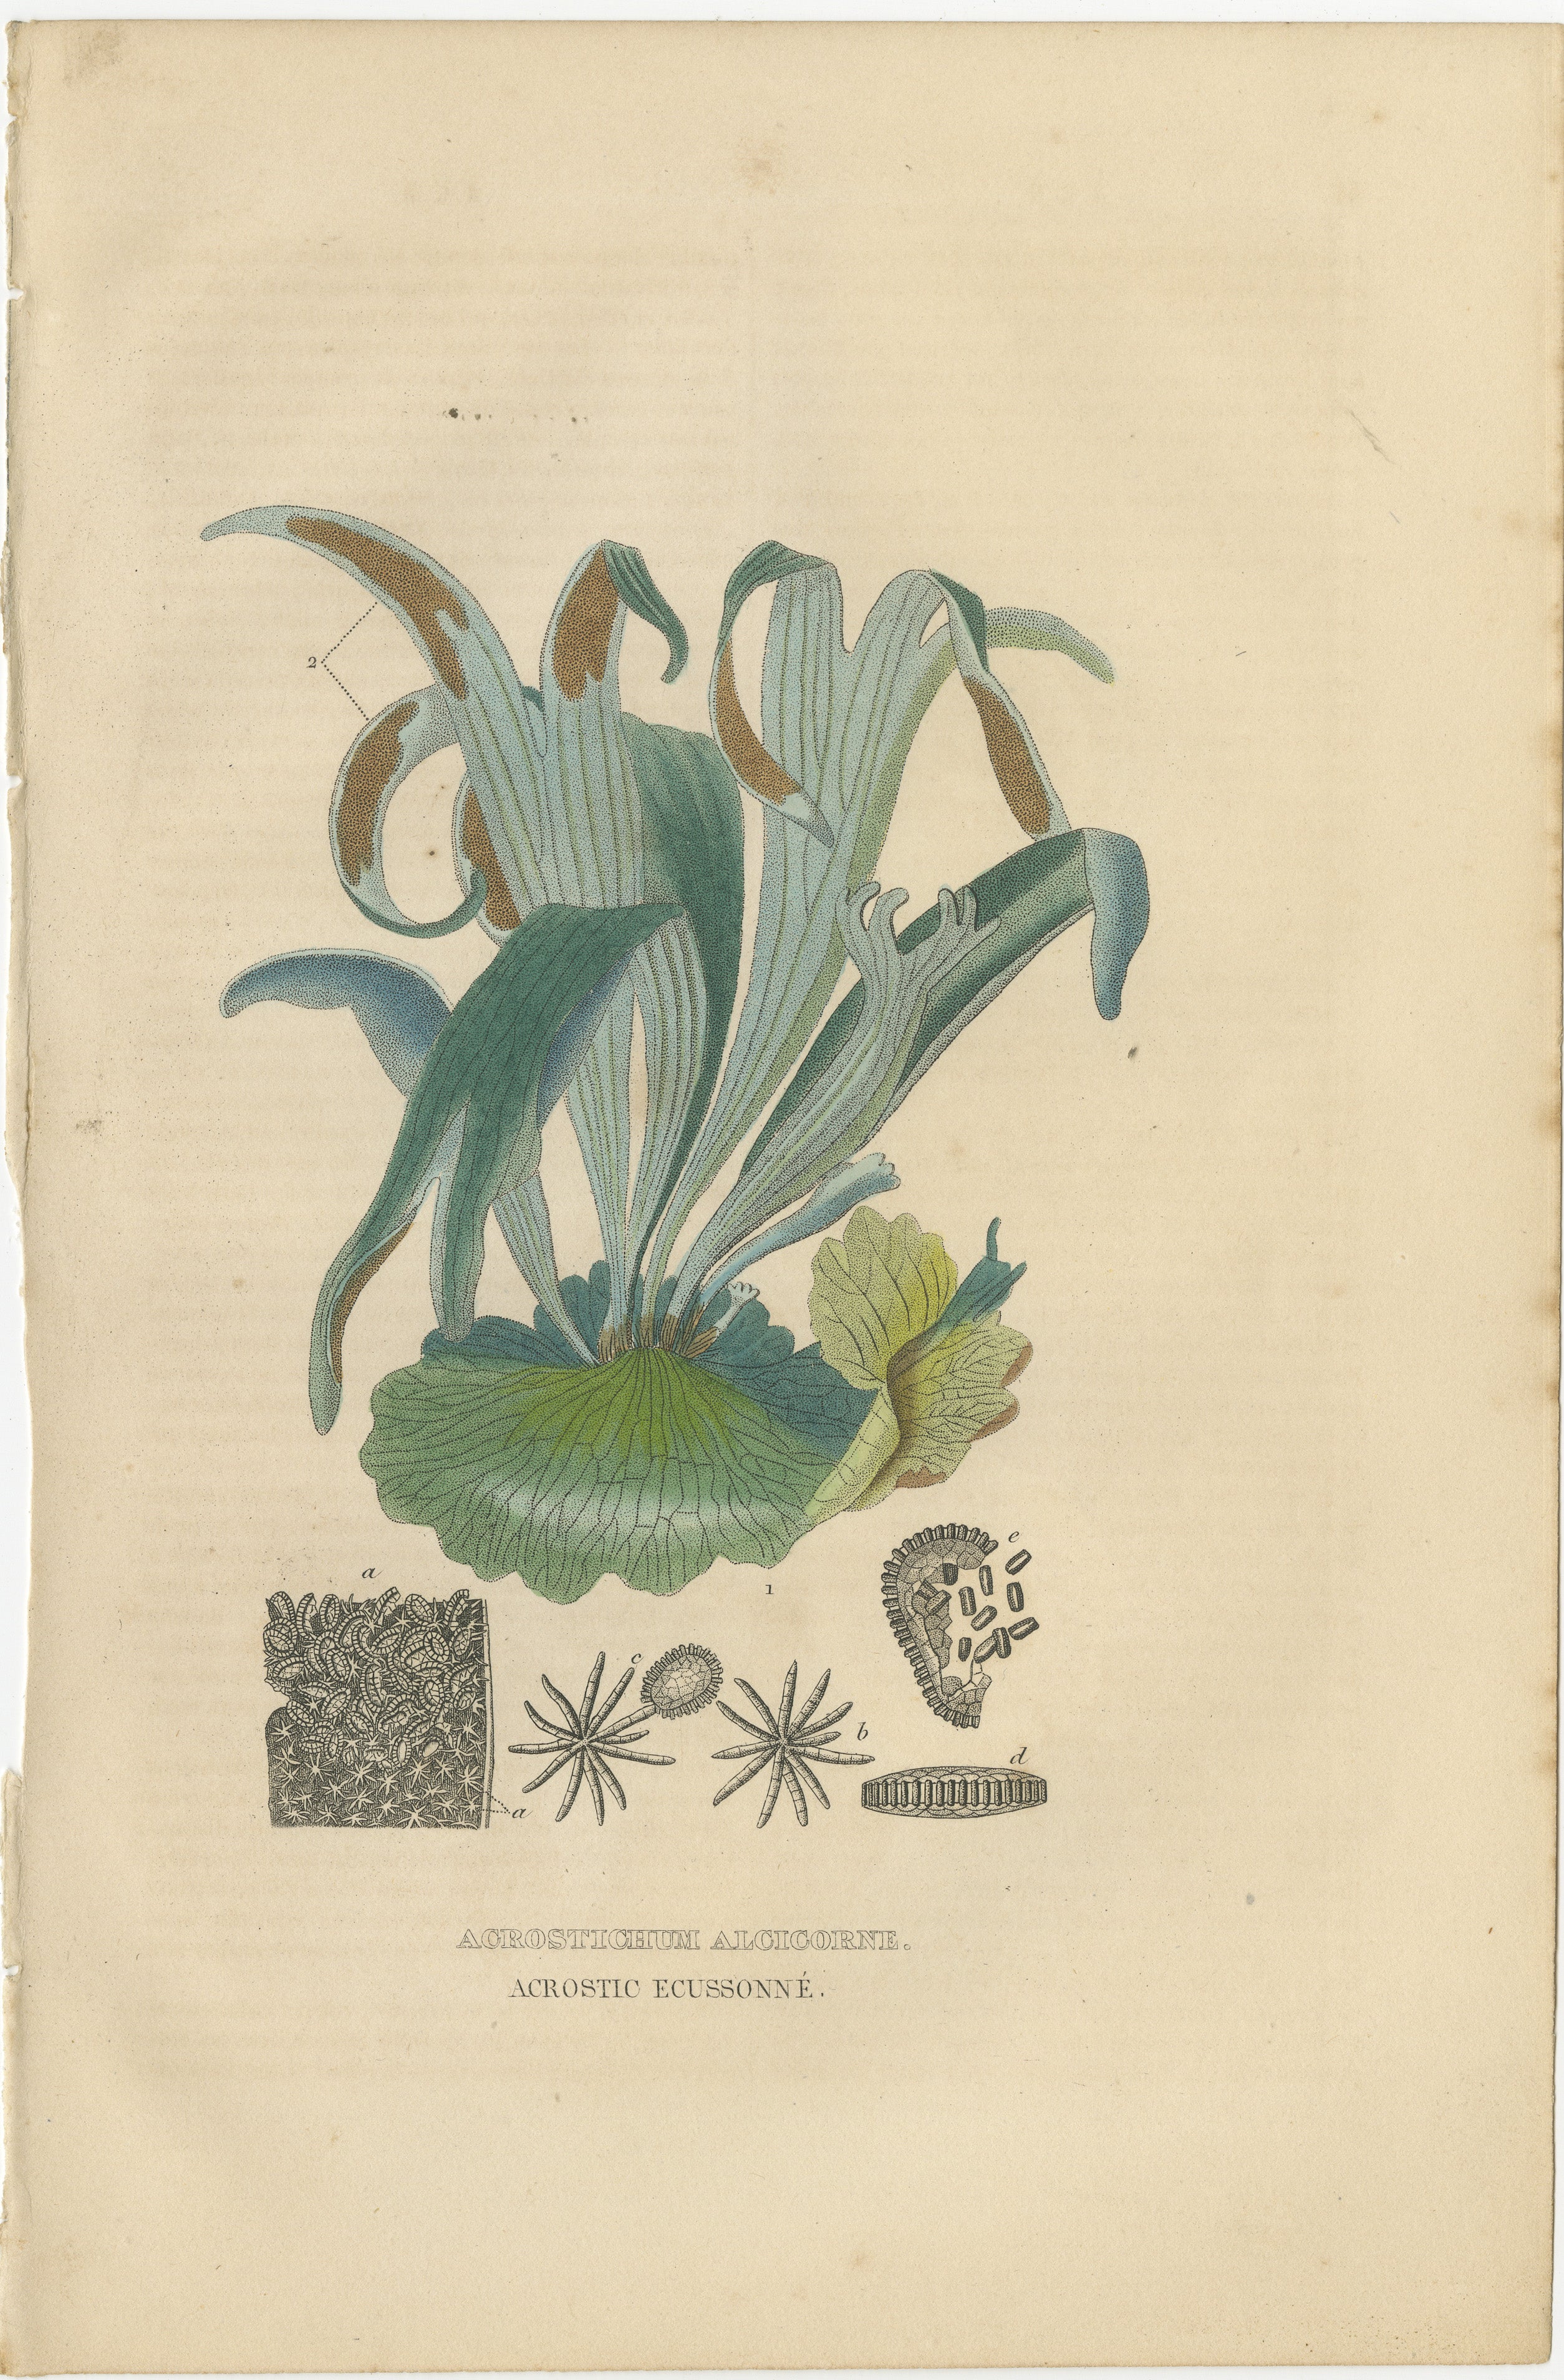 An antique botanical engraving of the Acrostichum Aureum, also known as the Golden Leather Fern, though the text 